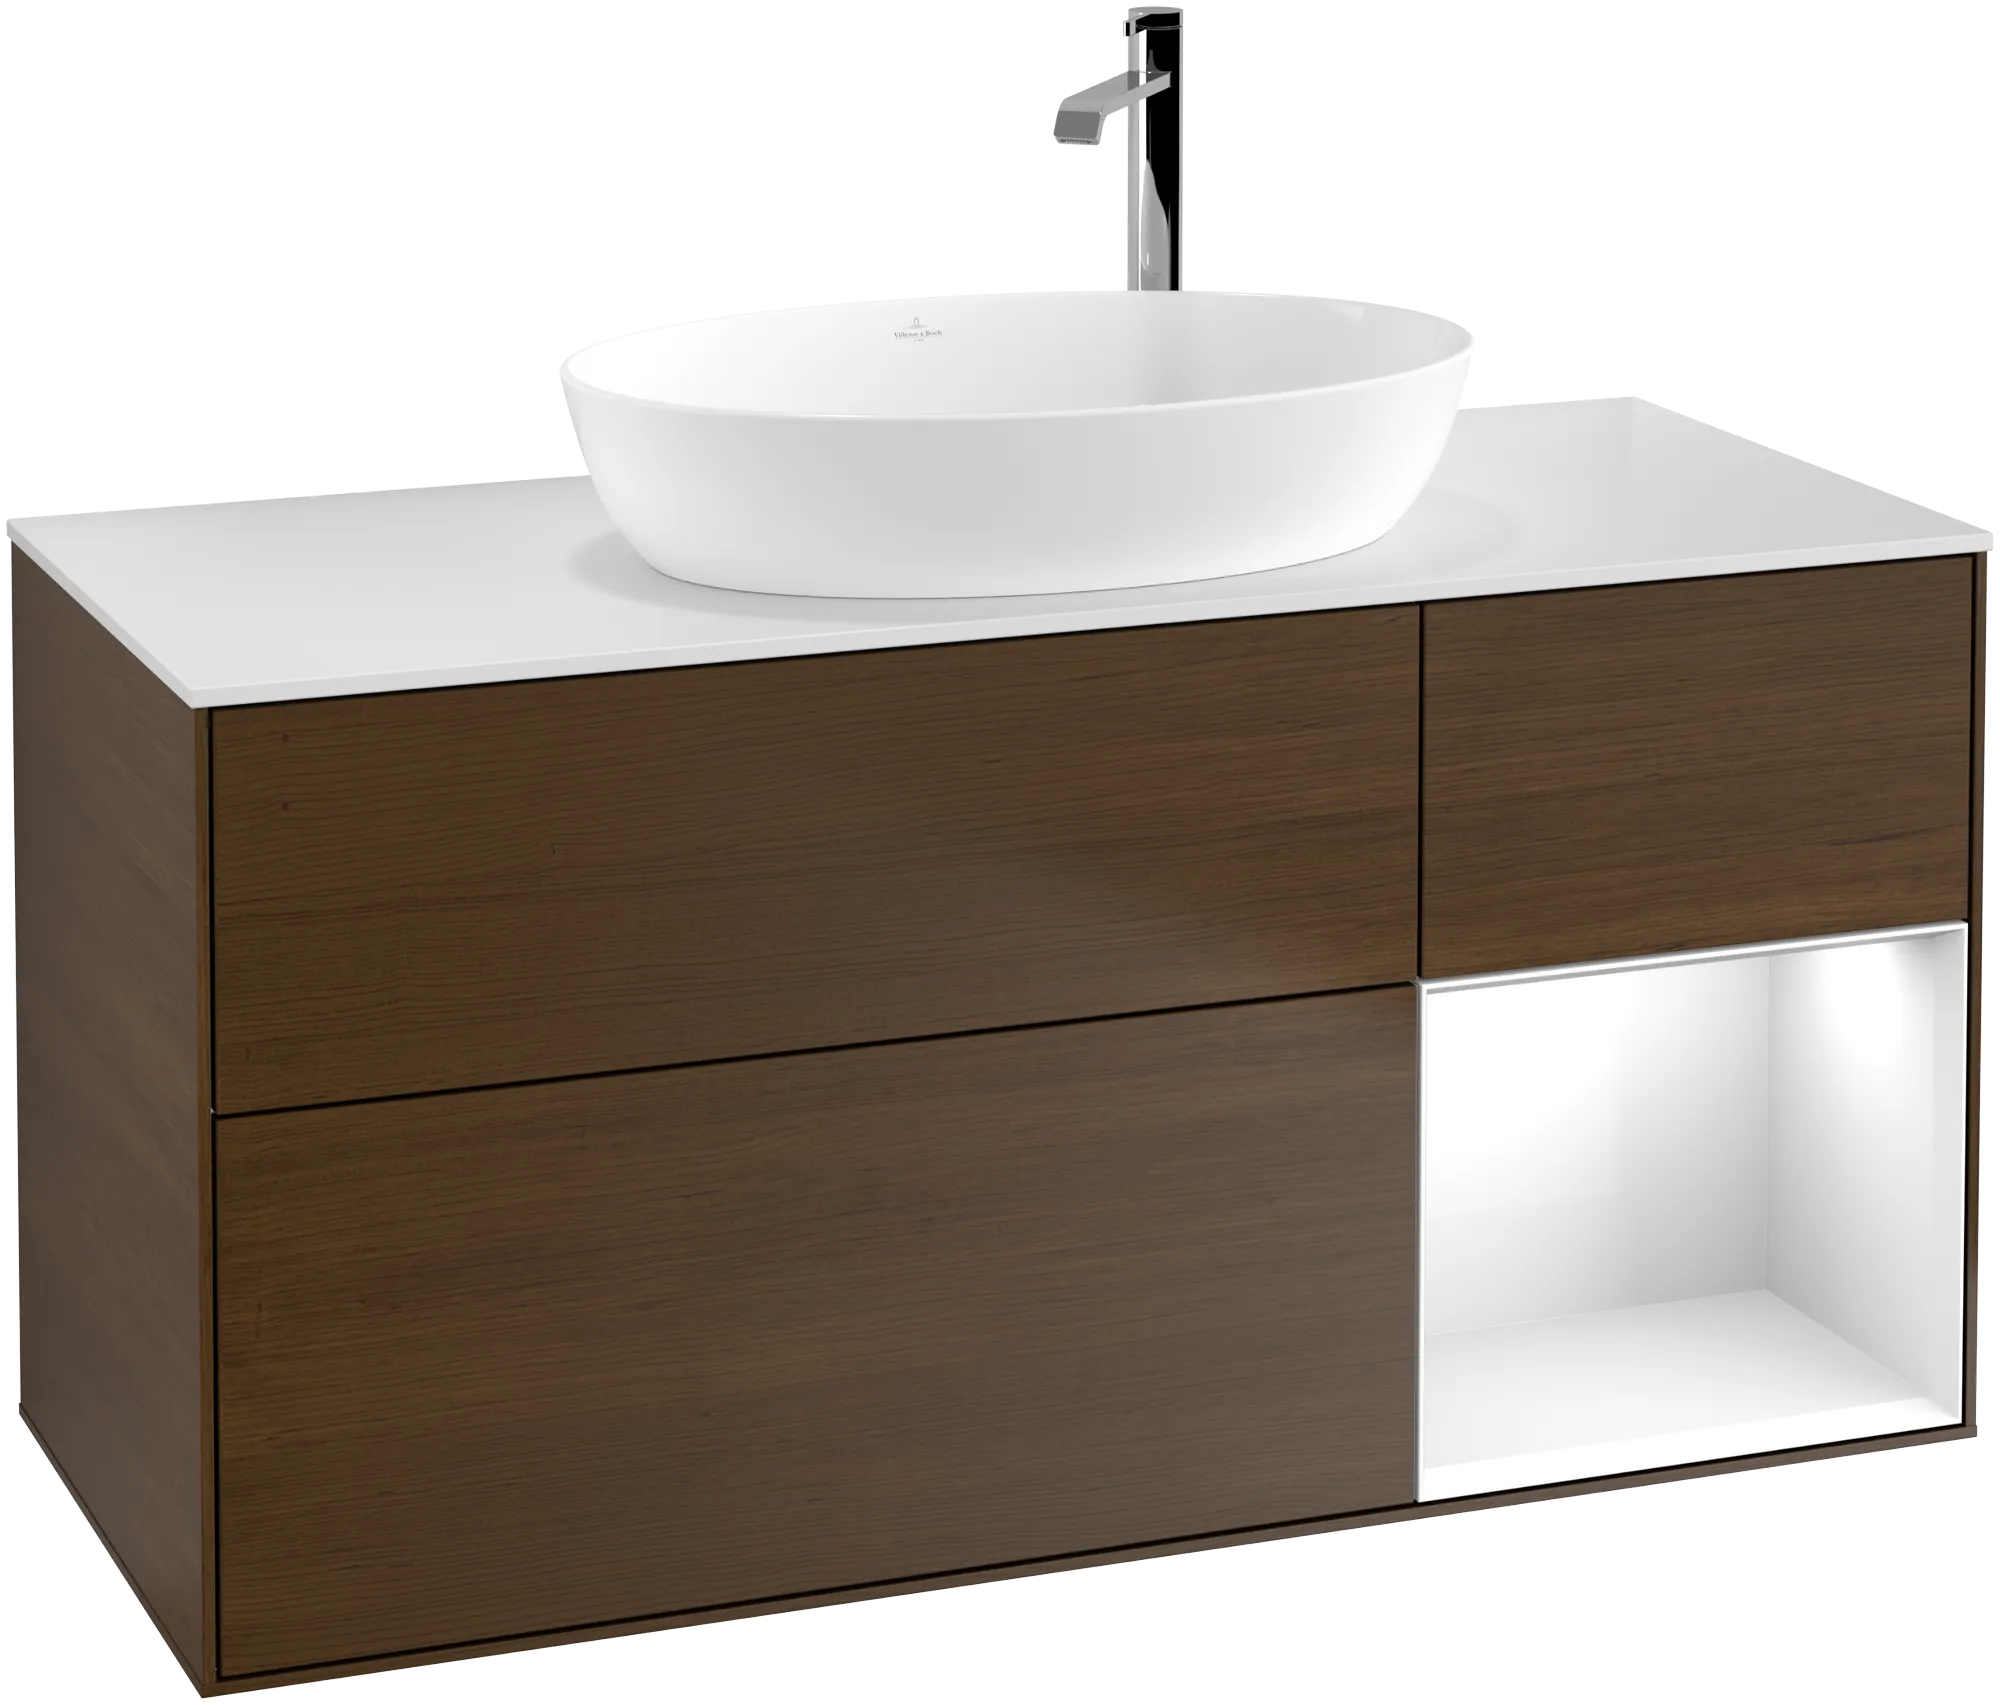 Picture of VILLEROY BOCH Finion Vanity unit, with lighting, 3 pull-out compartments, 1200 x 603 x 501 mm, Walnut Veneer / Glossy White Lacquer / Glass White Matt #G951GFGN